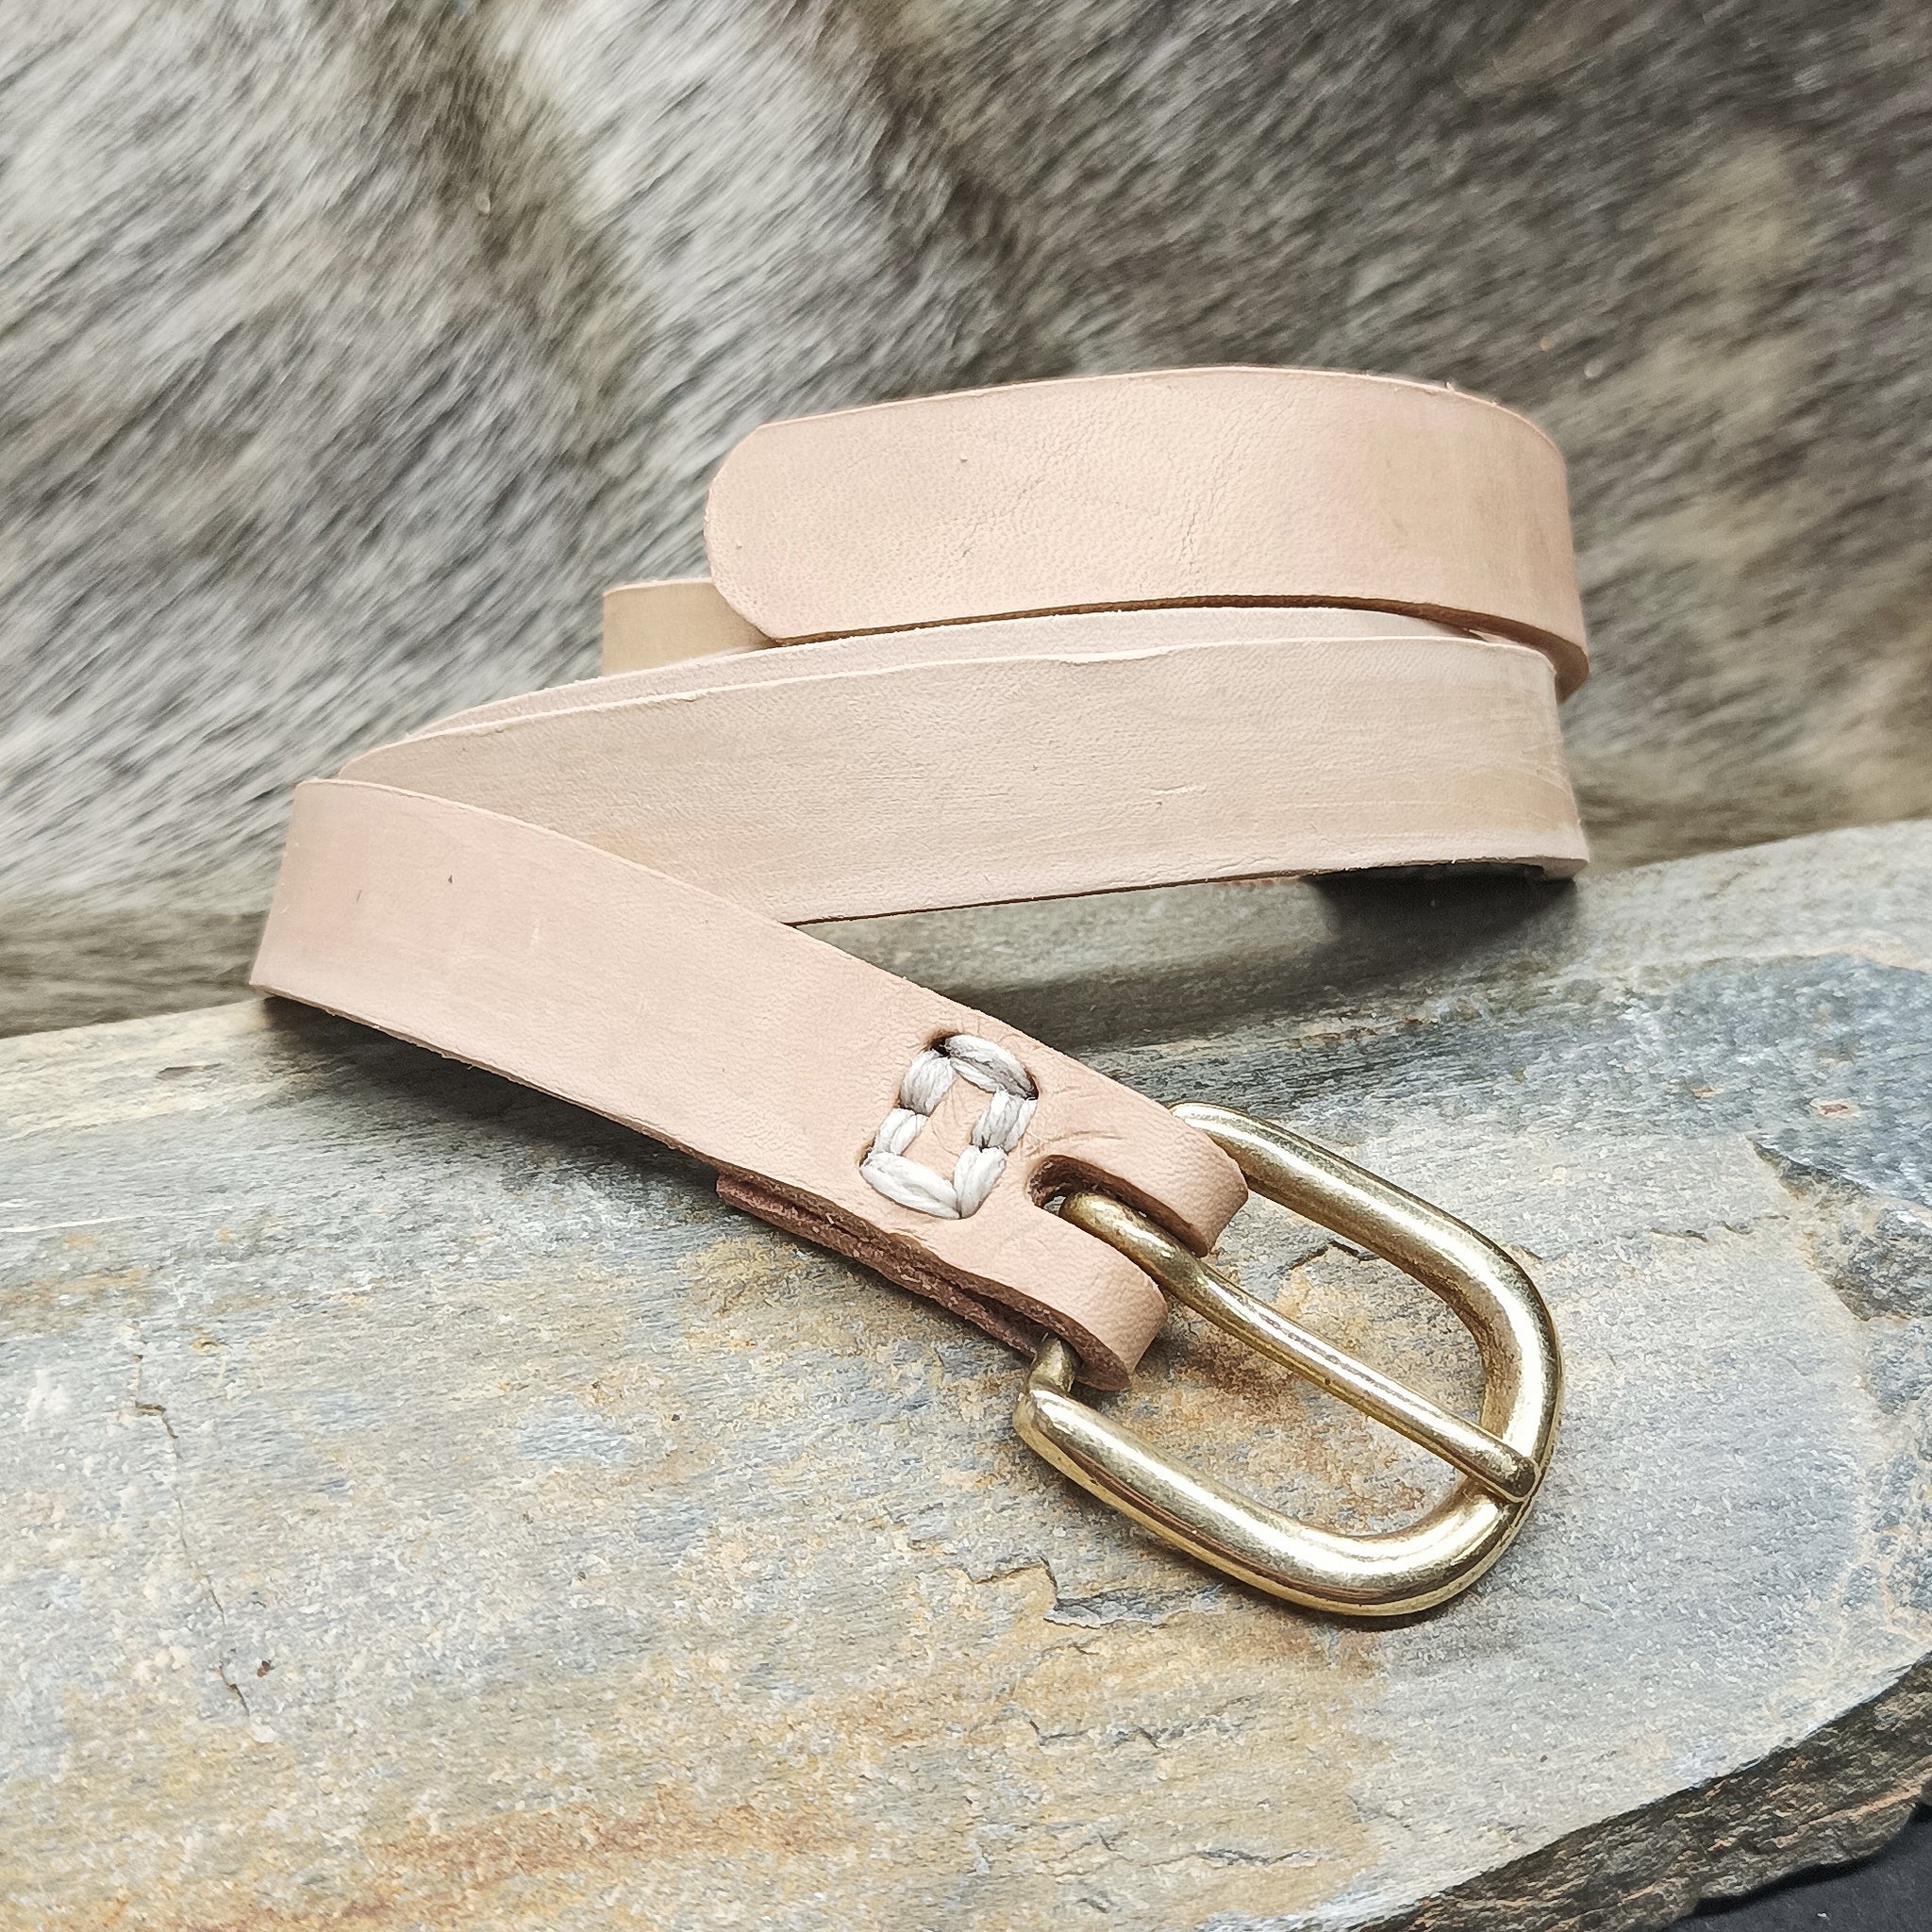 19mm Wide Leather Viking Belt with Brass Buckle - Natural Veg Tan